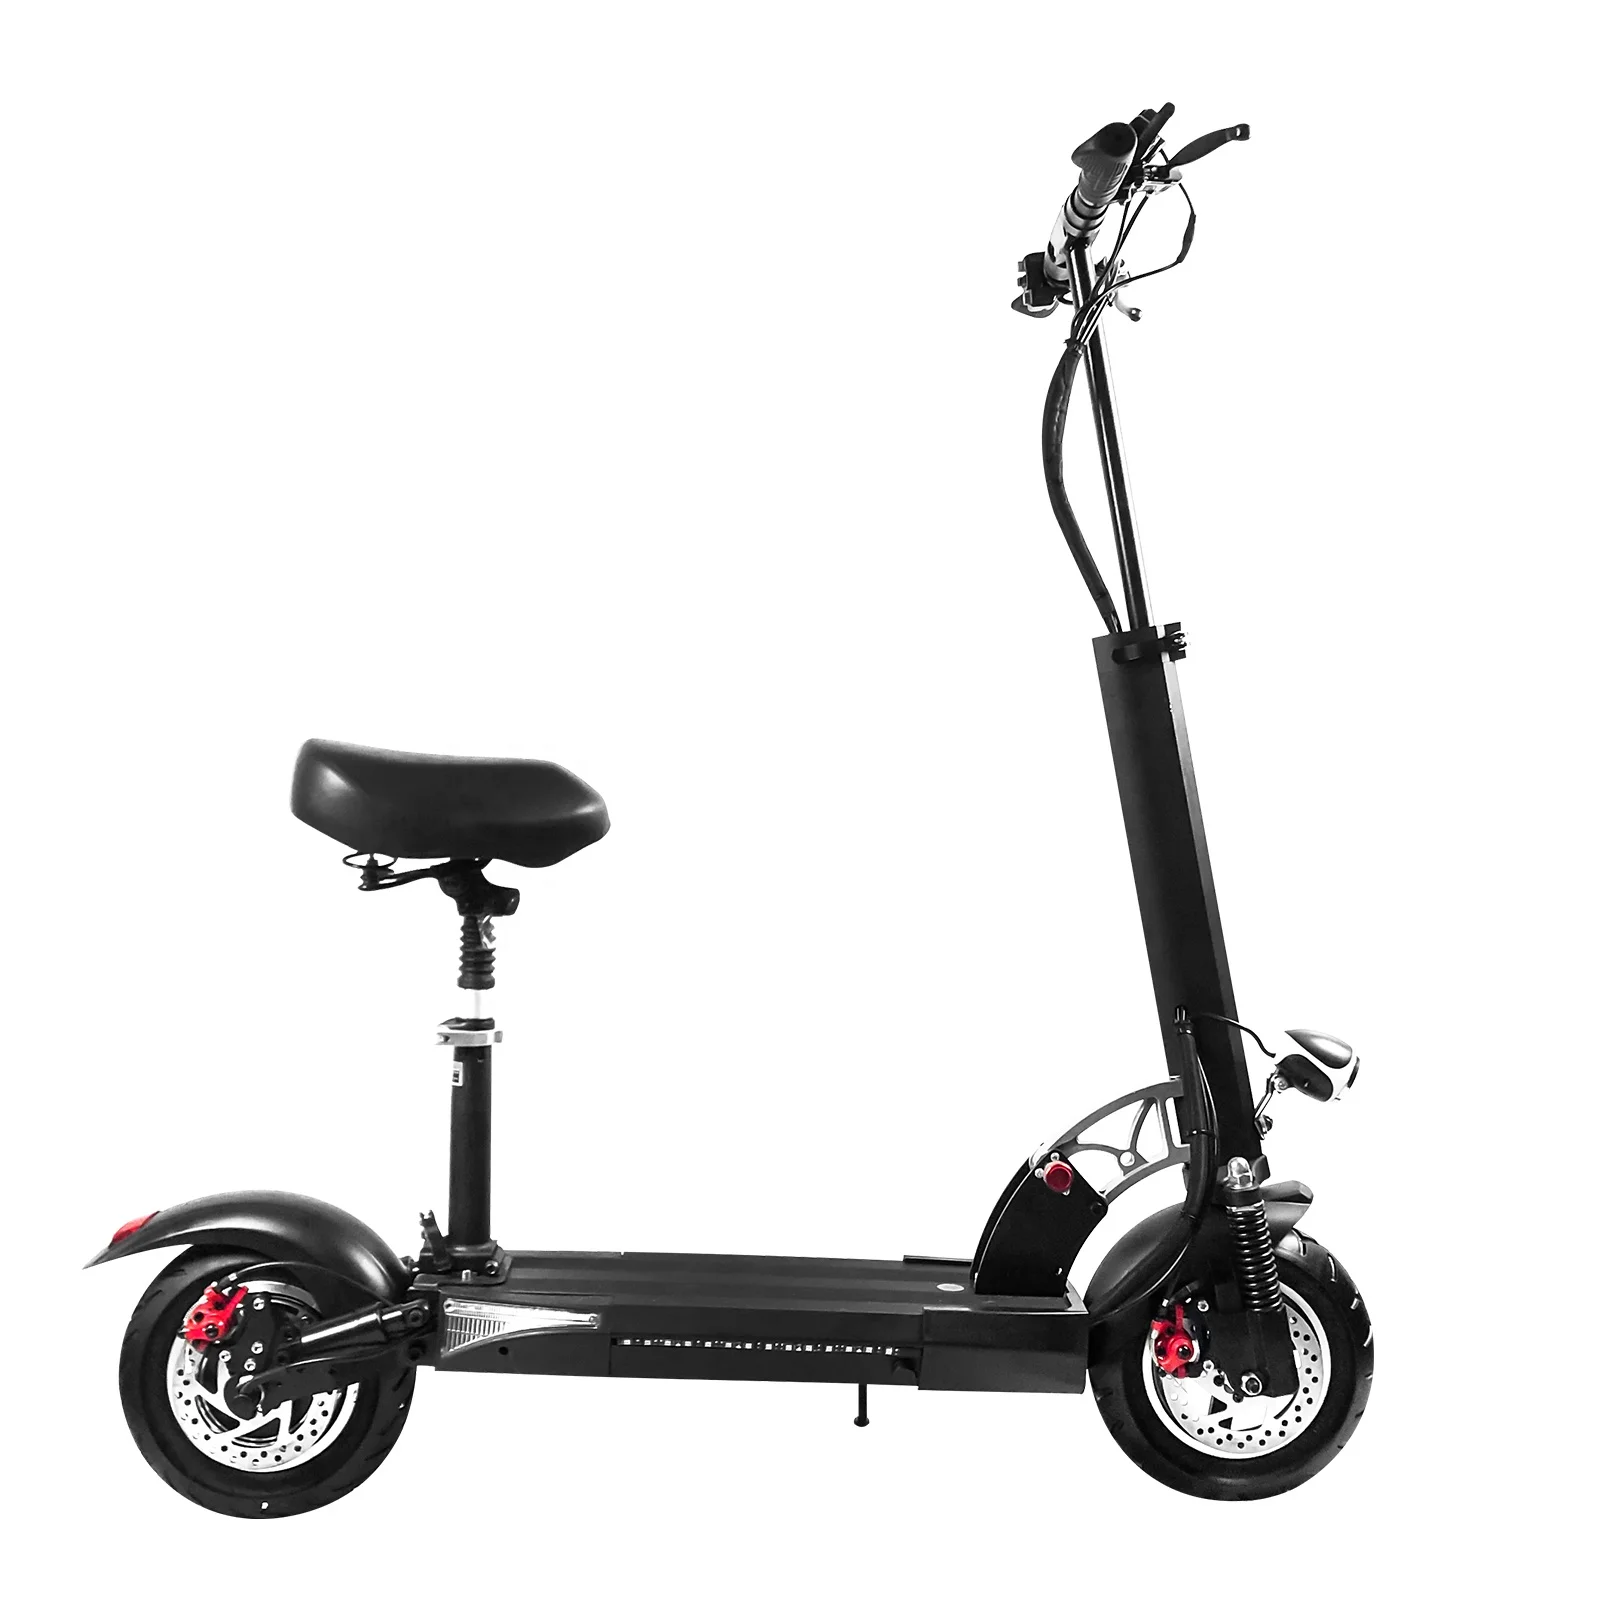 regnskyl Gentage sig Opdatering Source Fast speed 35 to 40 km/h Foldable electric scooters 800W e scooter 2  wheel electric scooter for adults on m.alibaba.com